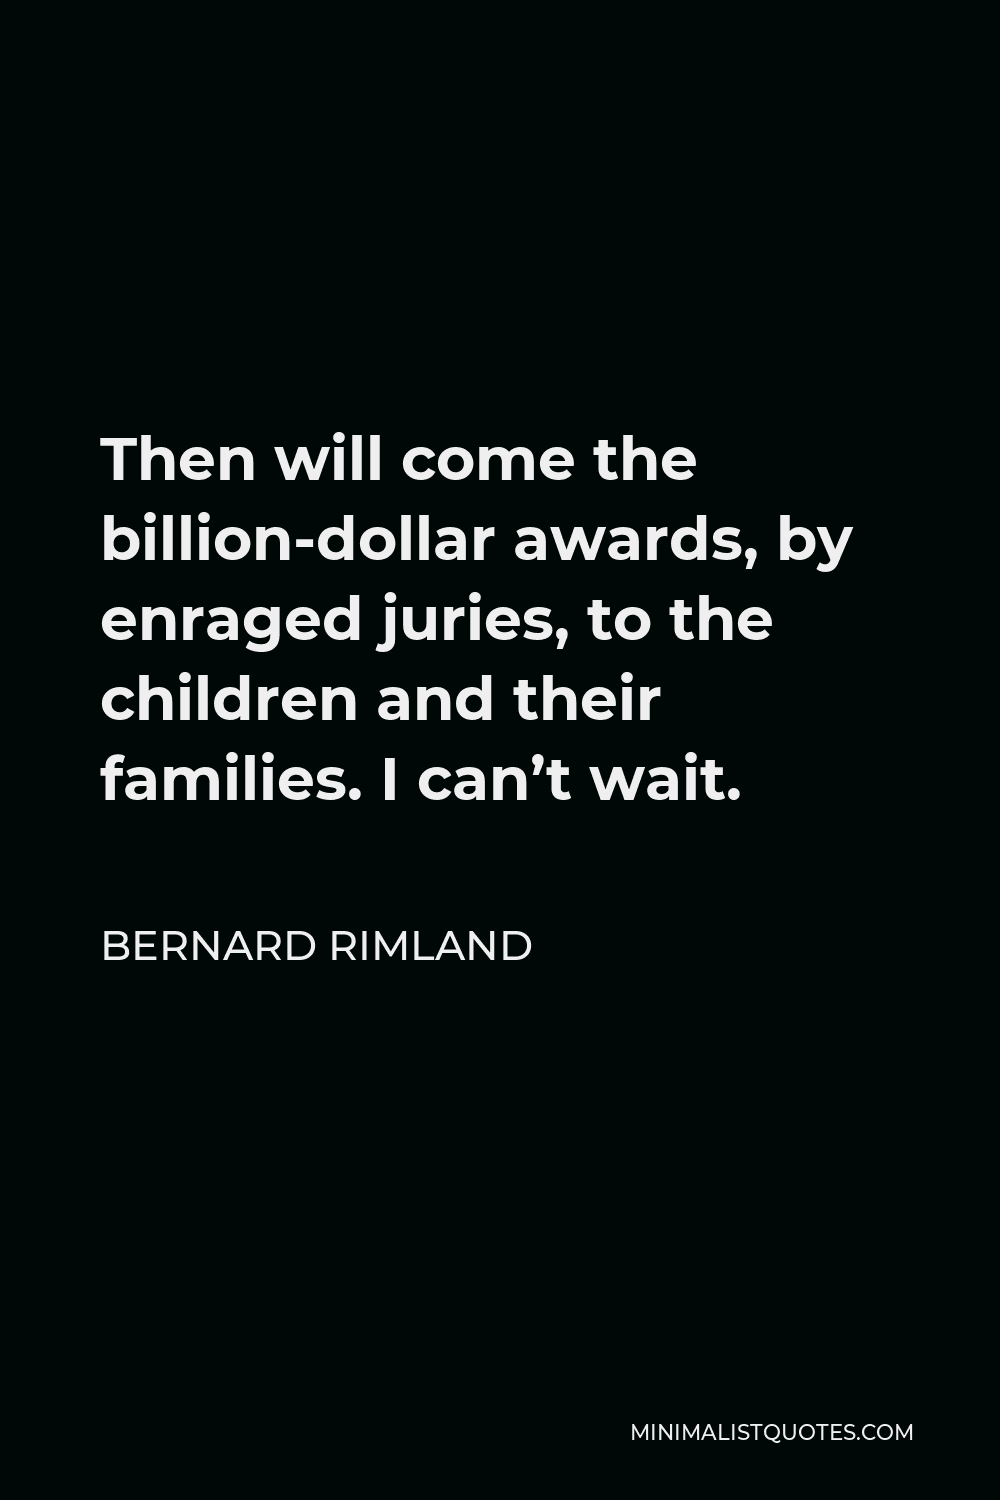 Bernard Rimland Quote - Then will come the billion-dollar awards, by enraged juries, to the children and their families. I can’t wait.